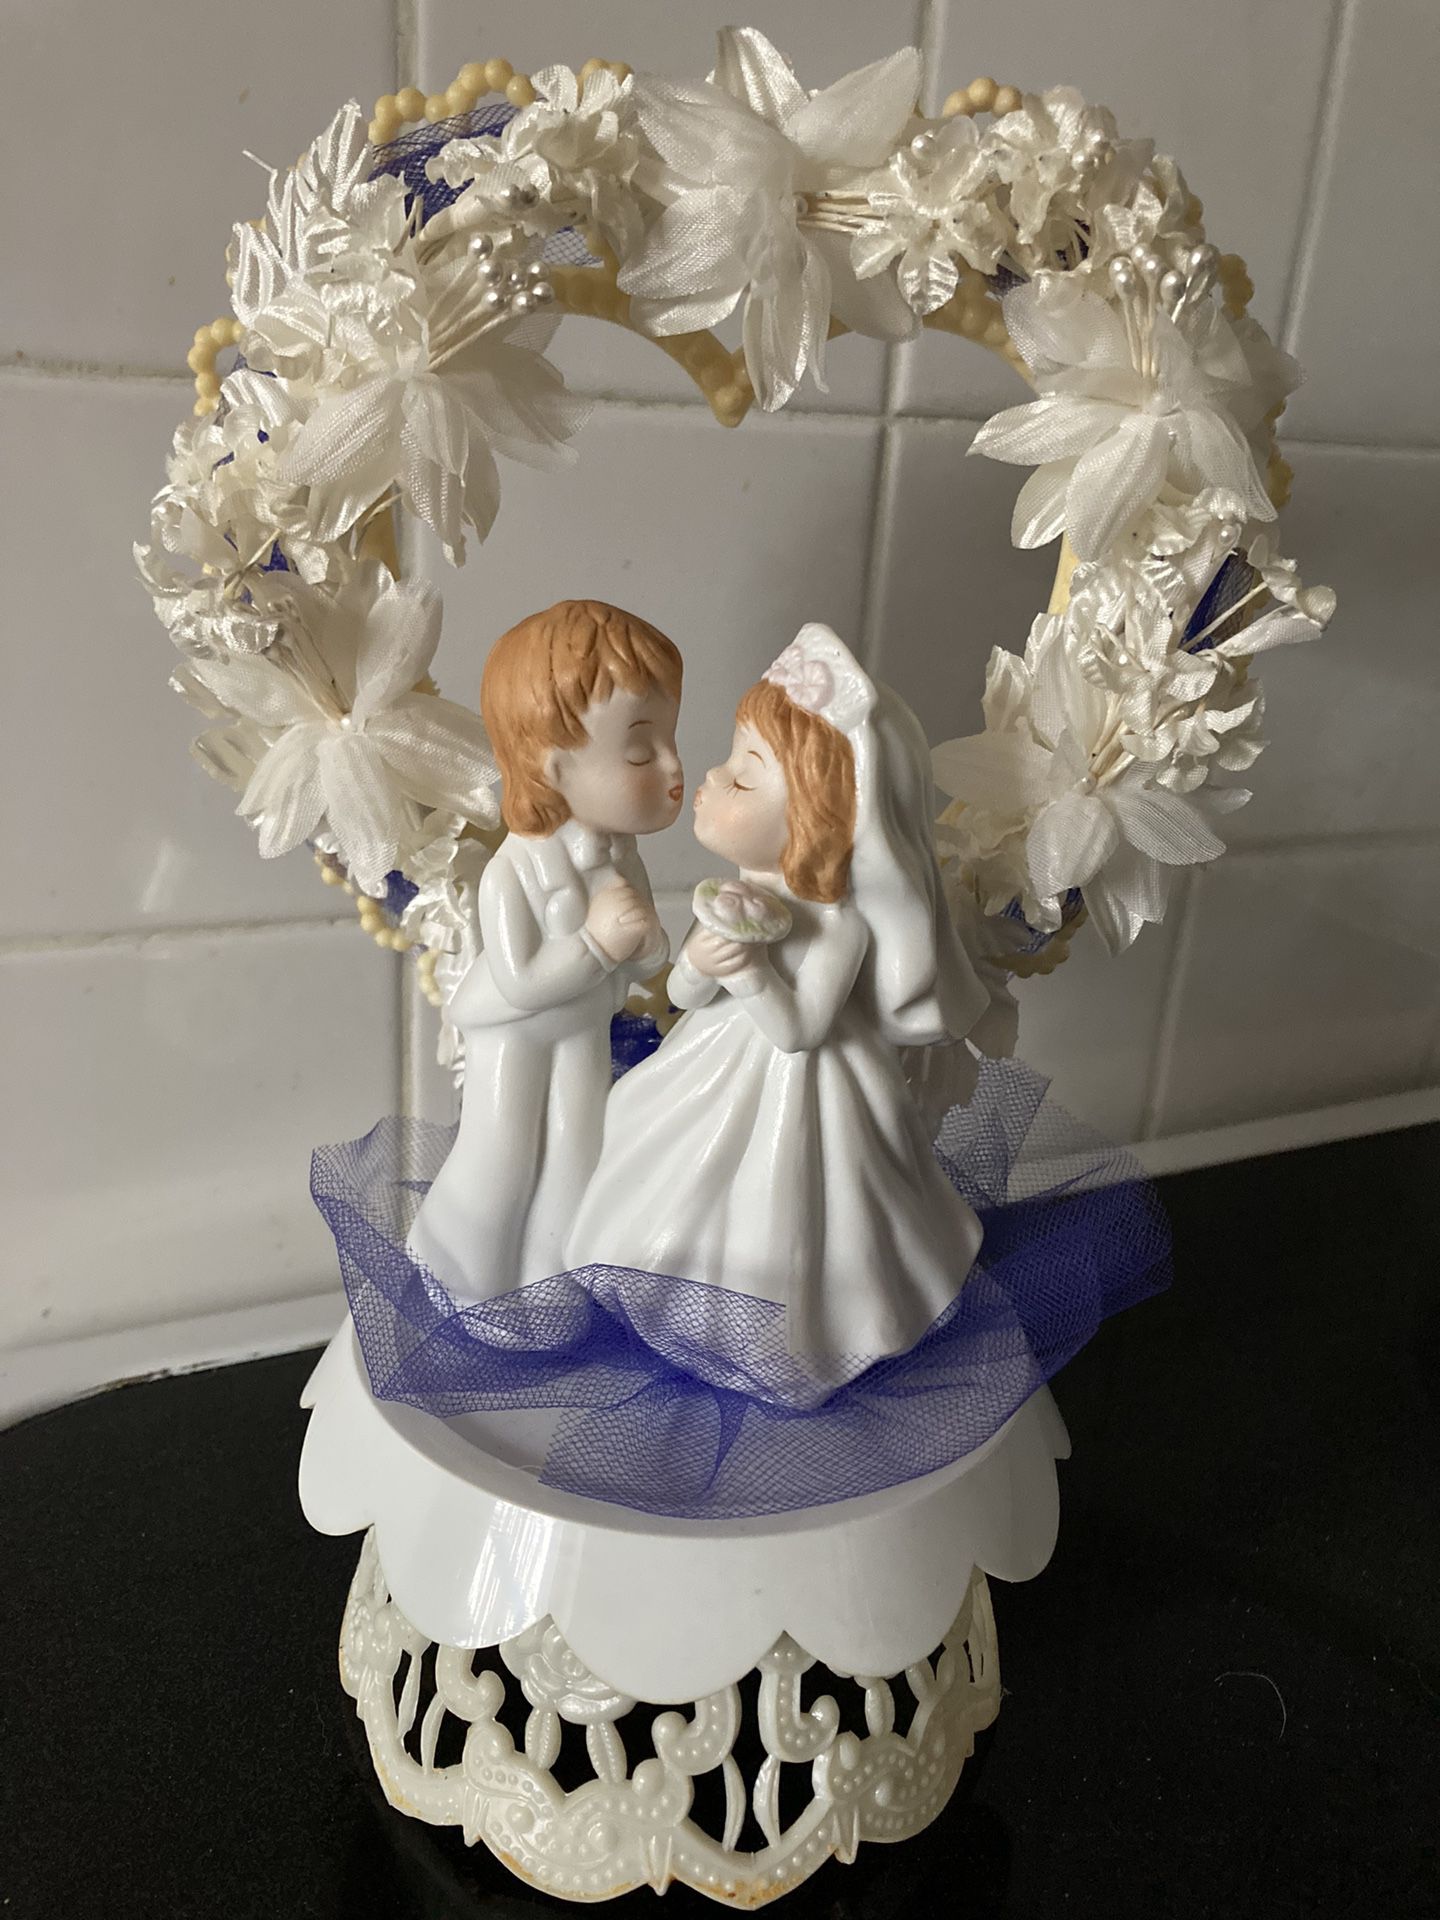 Wedding Cake Topper:  9.5” High X 6.5” Wide, Ribbon is Changeable